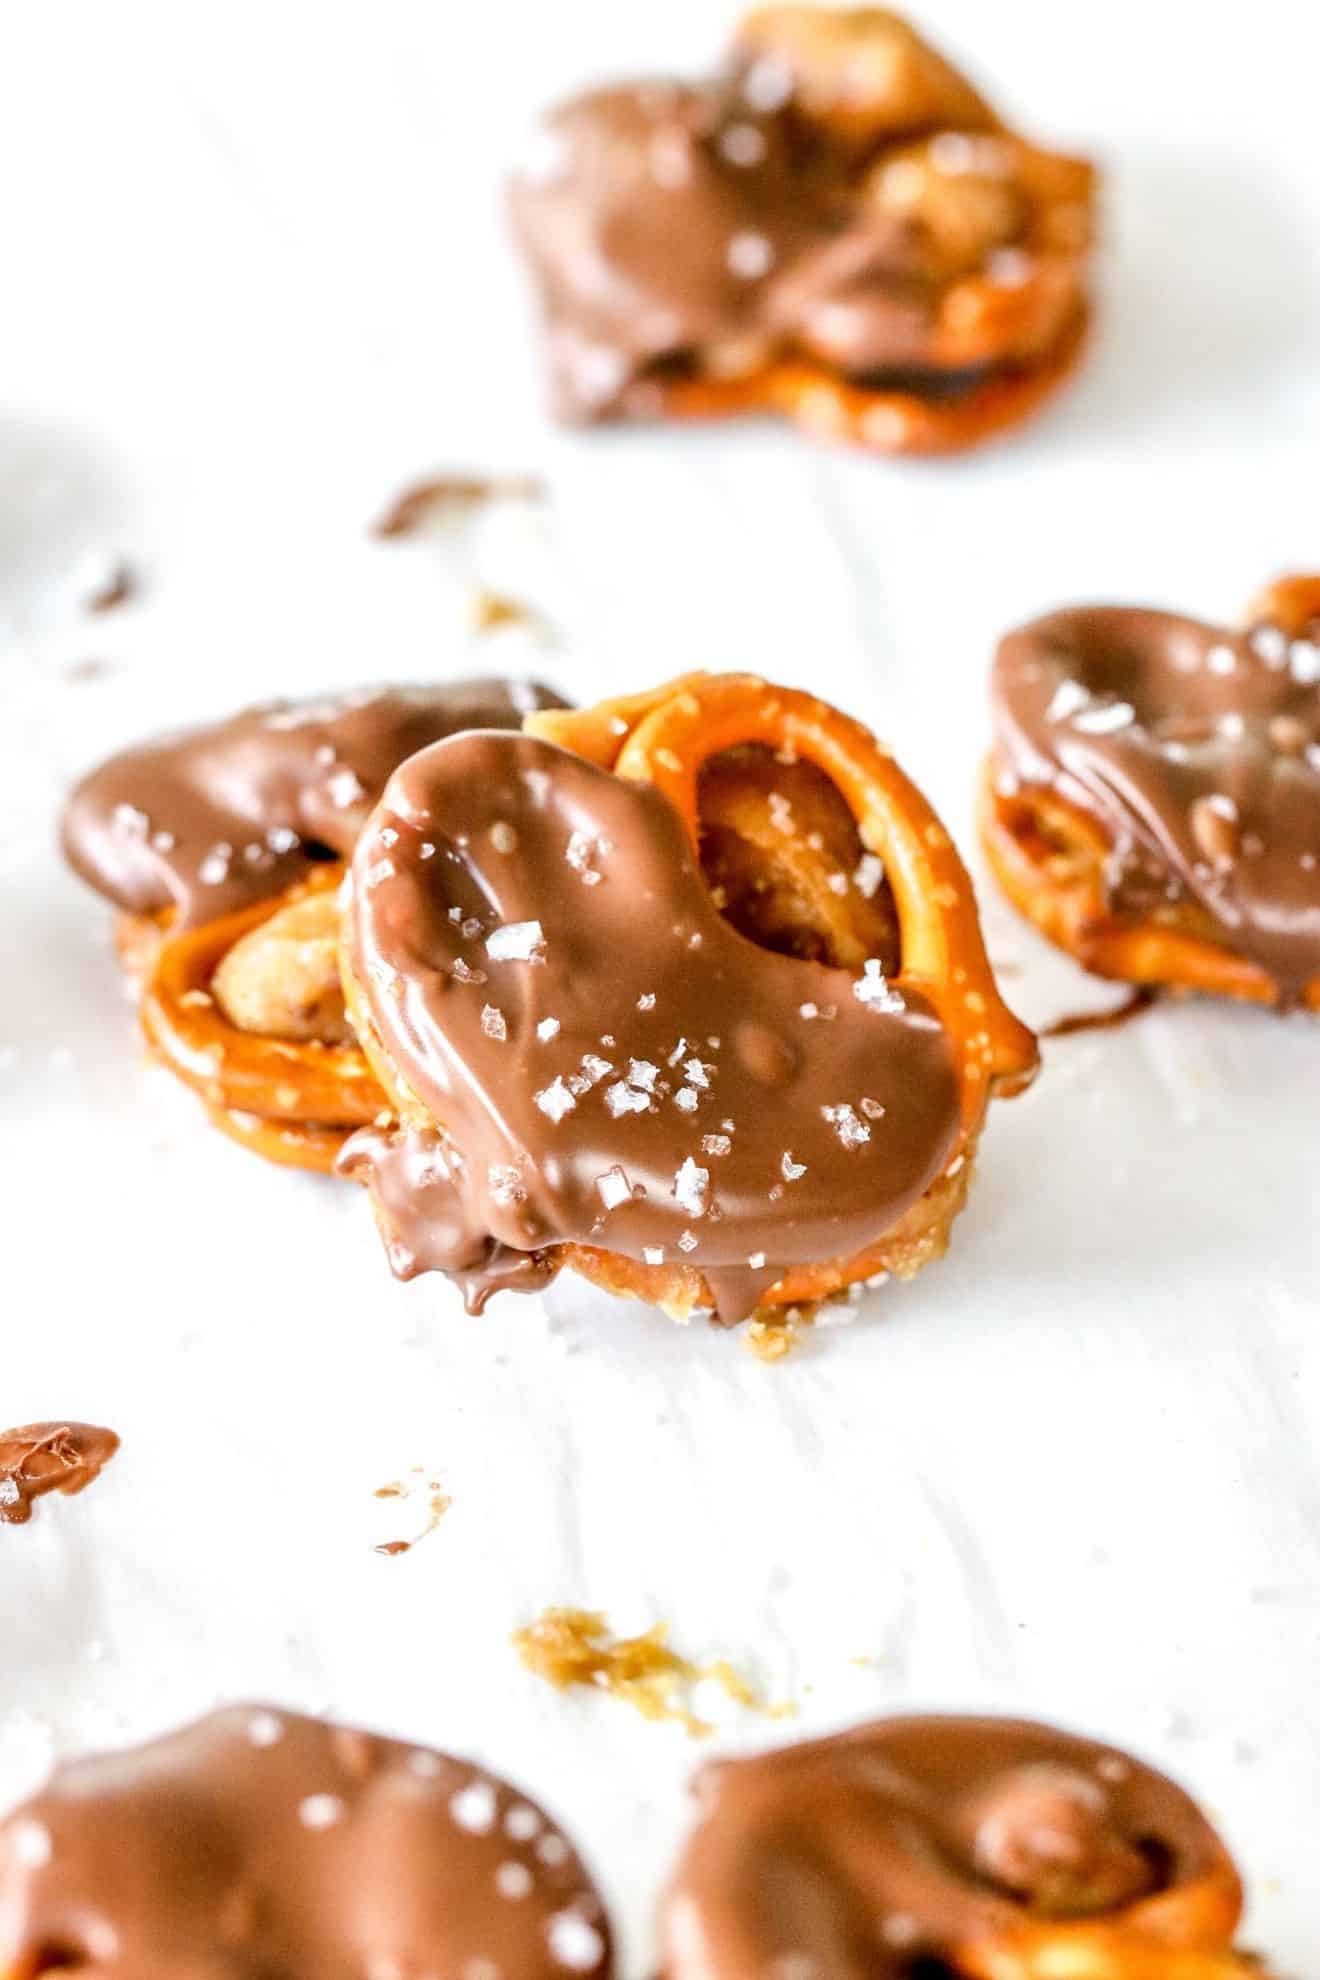 One peanut butter pretzel sandwich is dipped in chocolate and leaning against another pretzel sandwich. The pretzels wit on a white piece of parchment paper and more pretzel sandwiches are blurred in the front and behind the pretzel sandwiches.